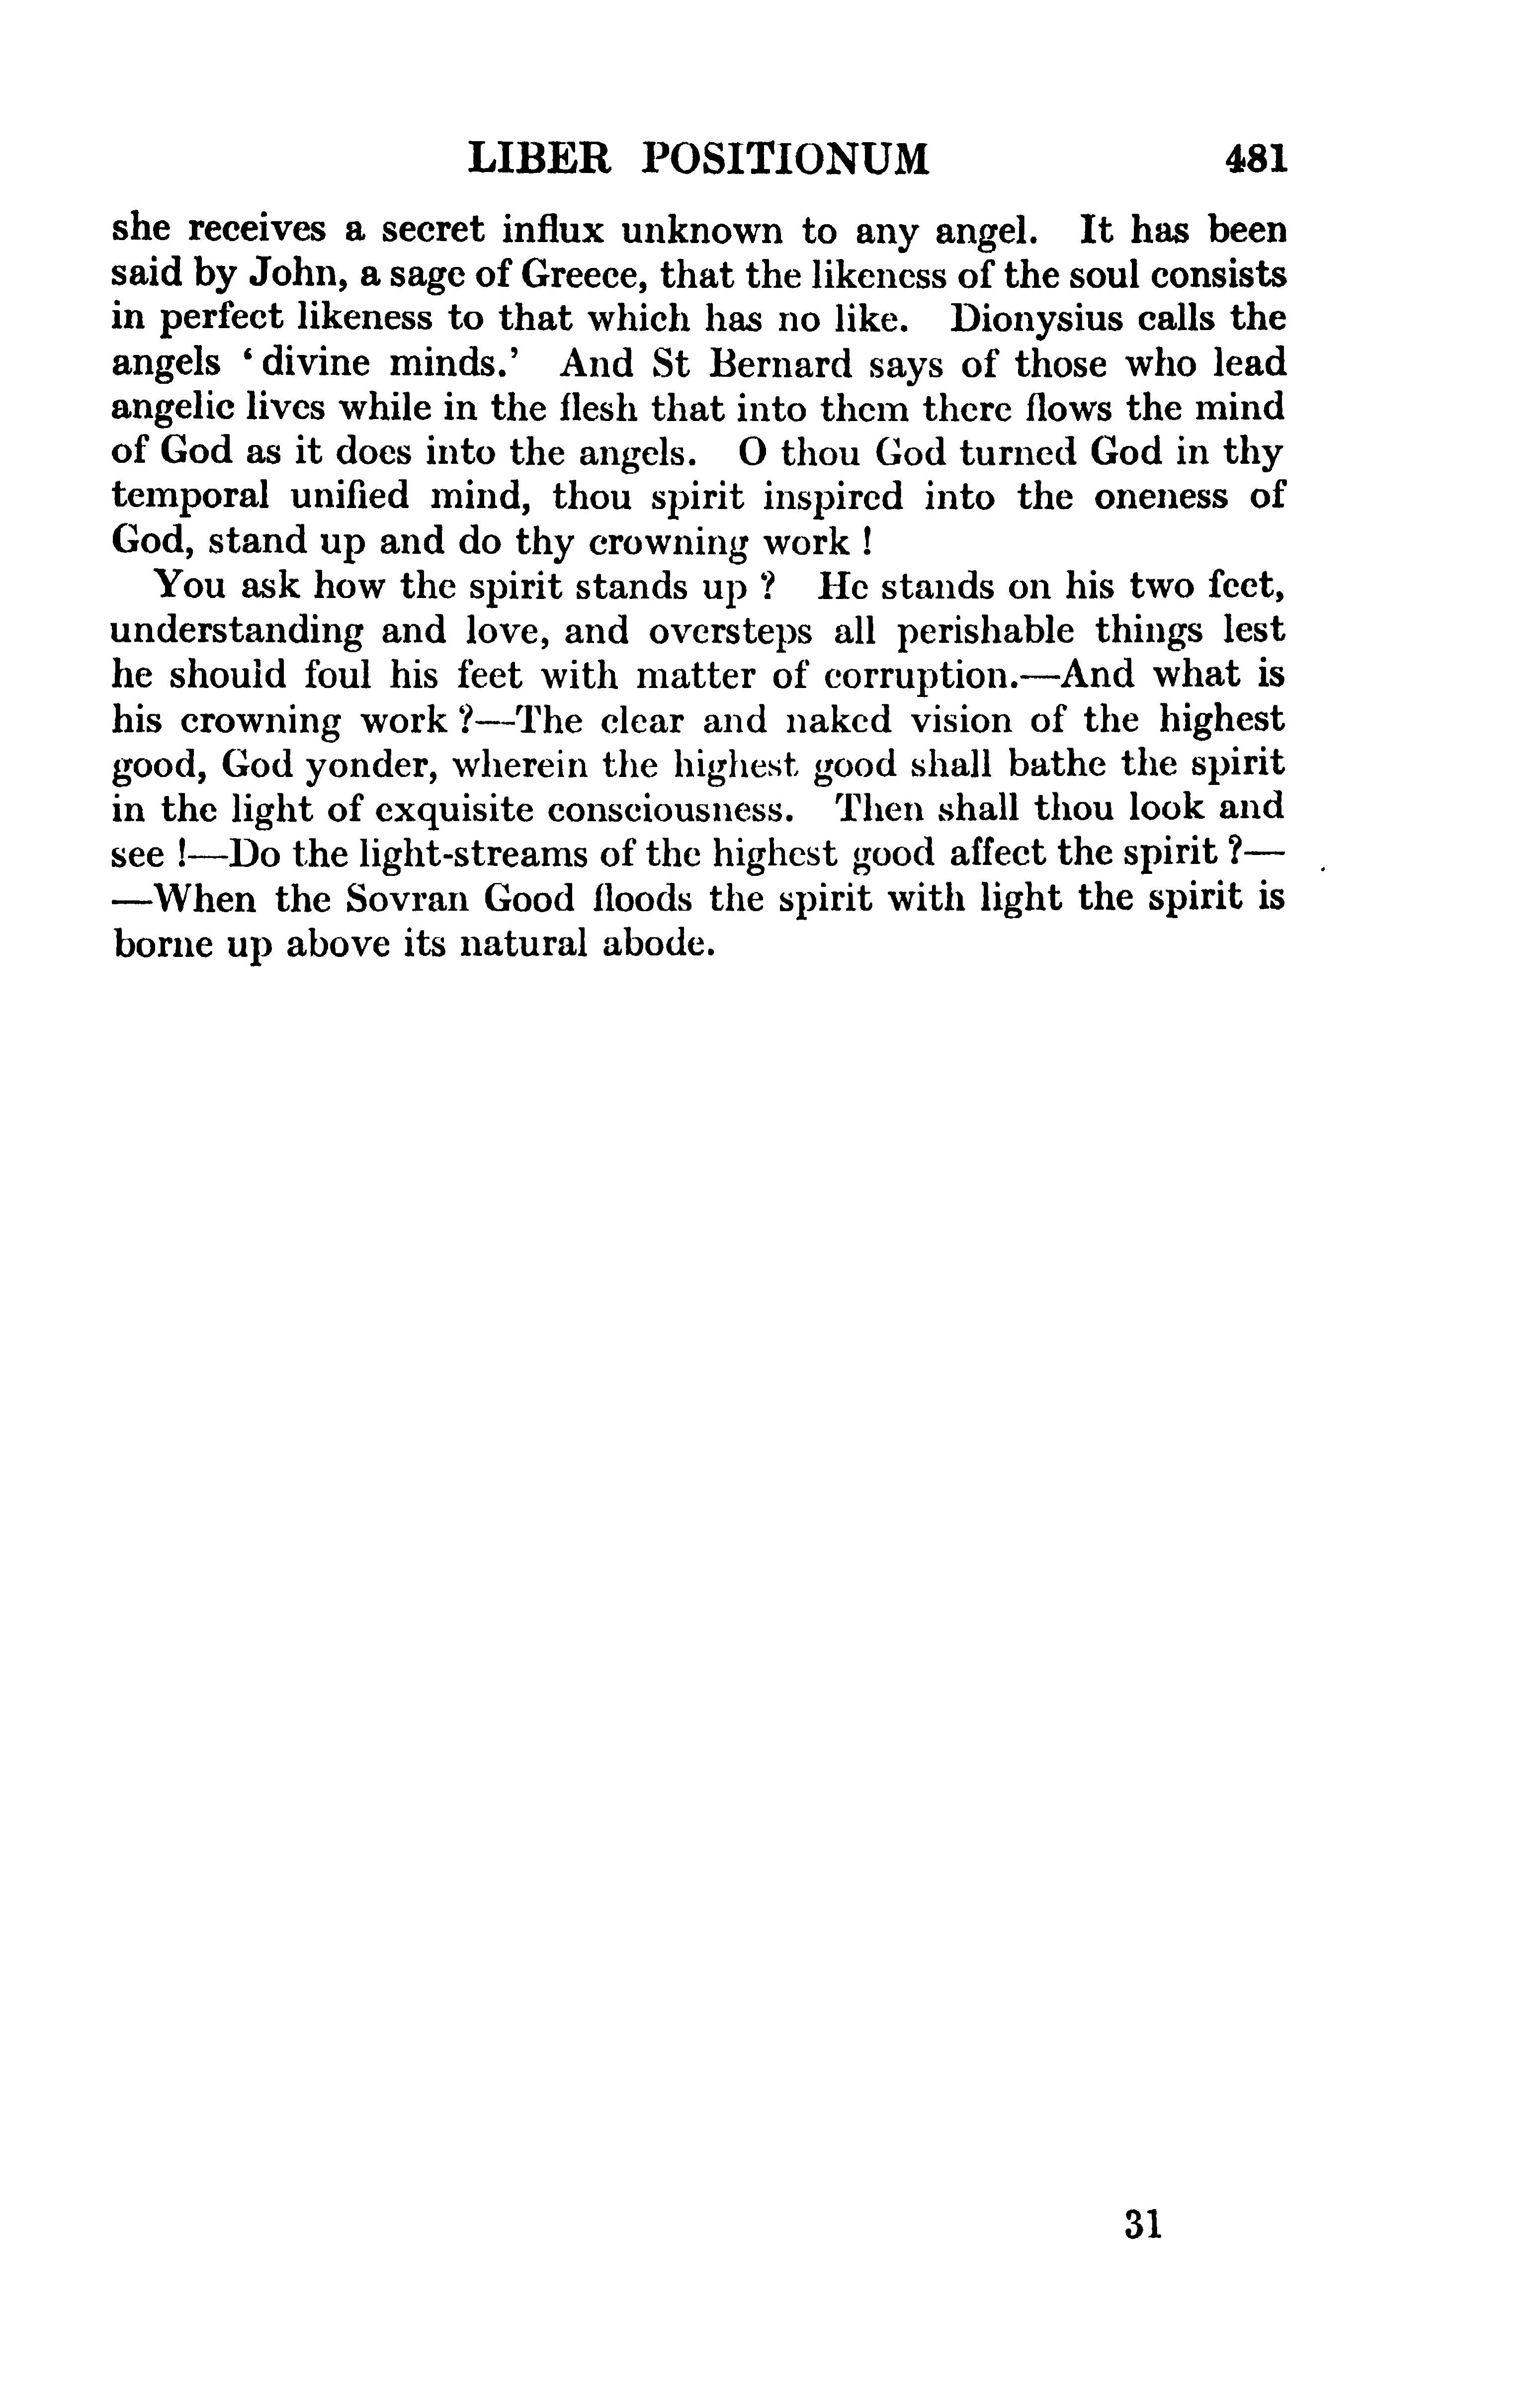 Image of page 0505